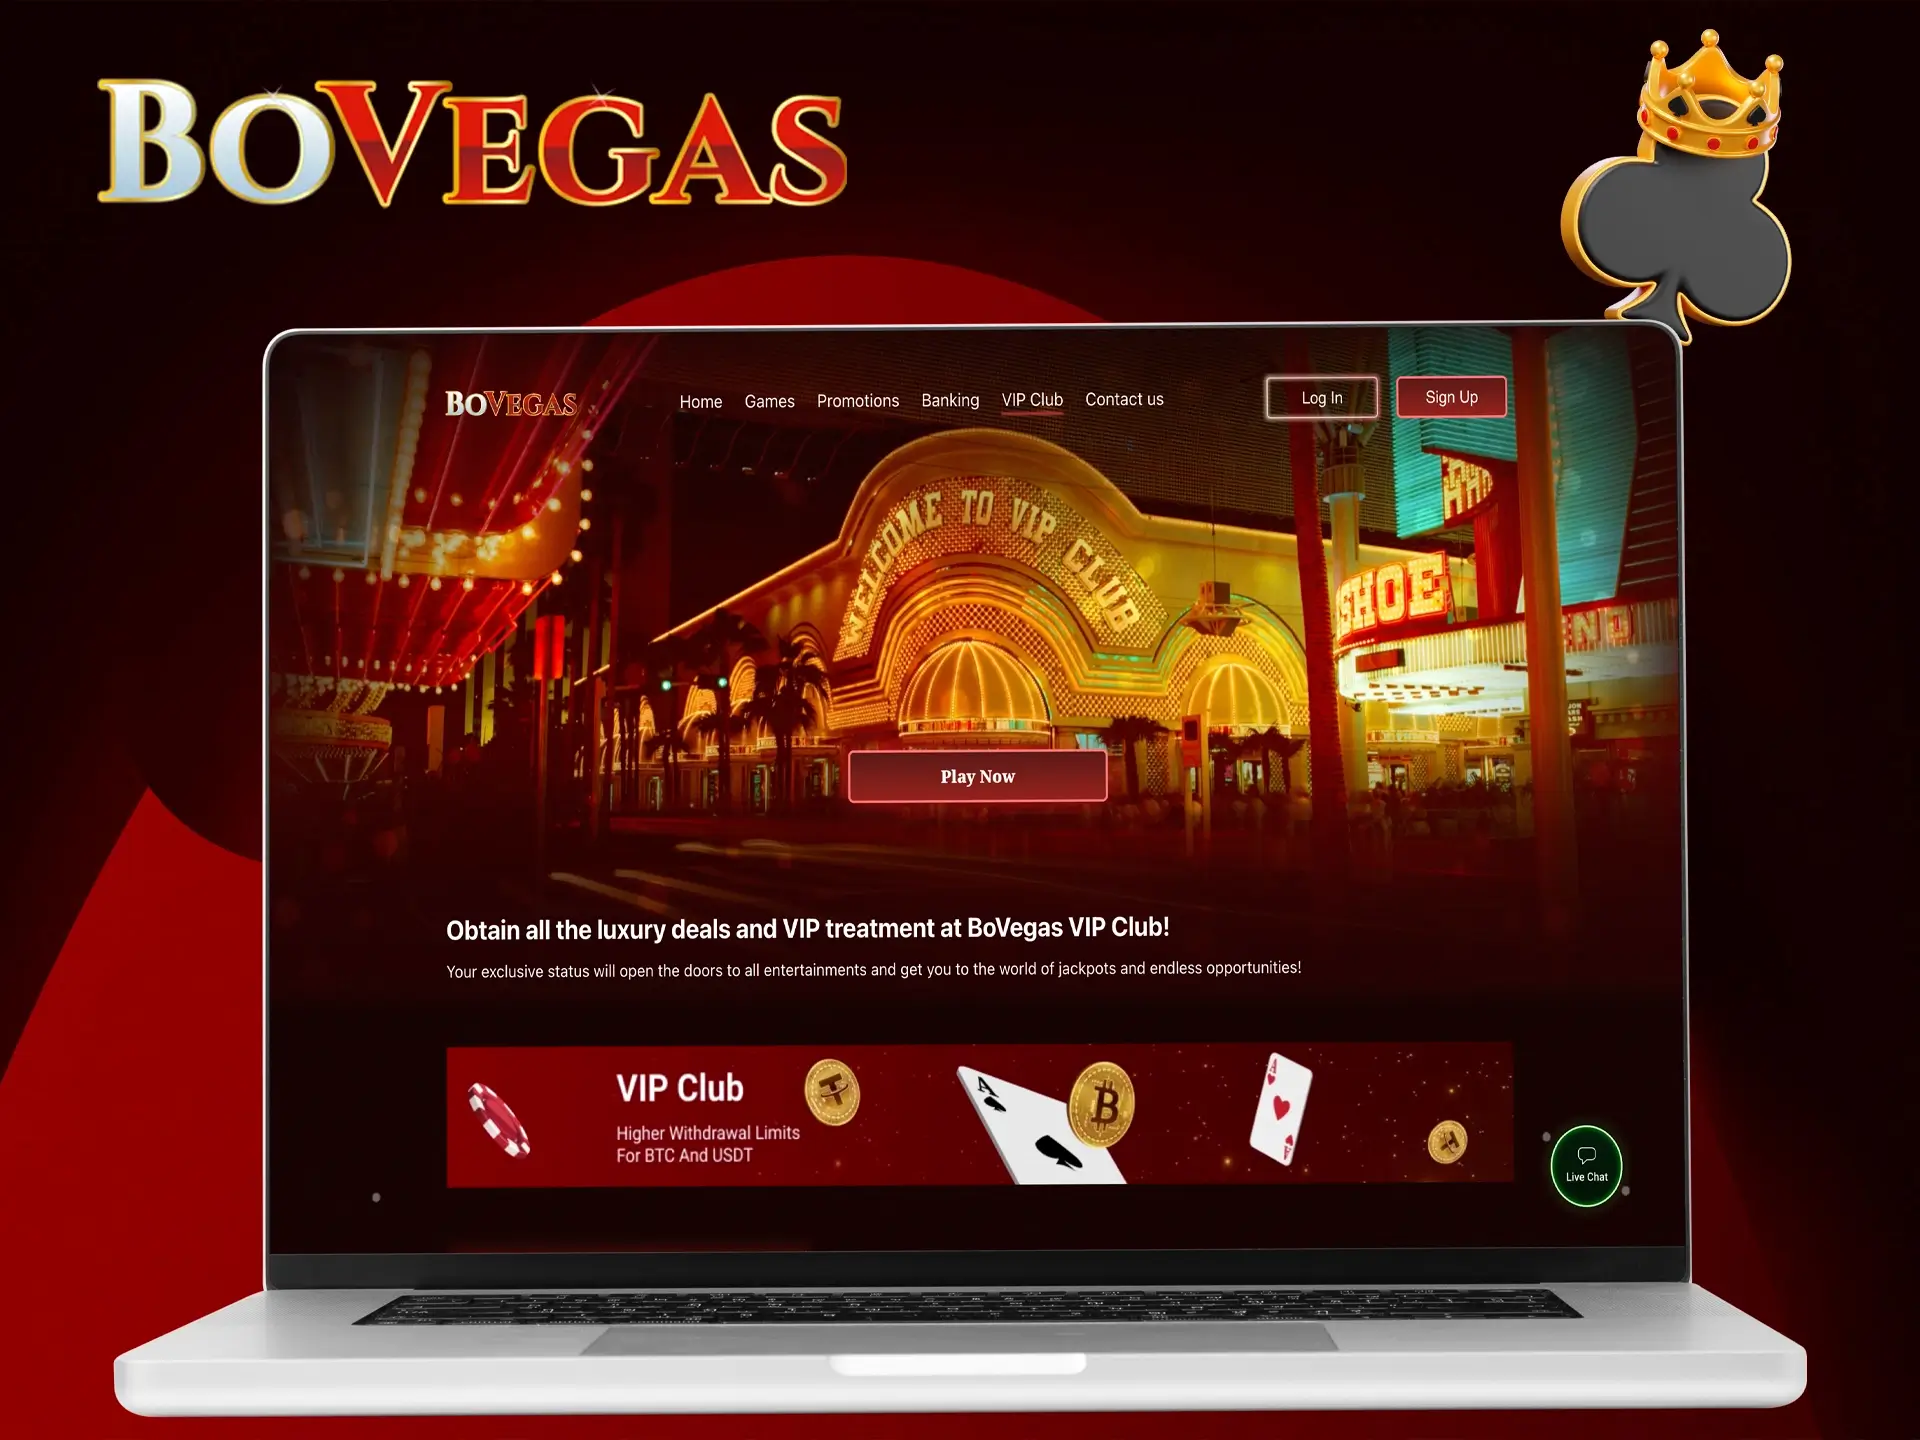 Growing your gaming account gives you limitless possibilities and new bonuses from BoVegas Casino.